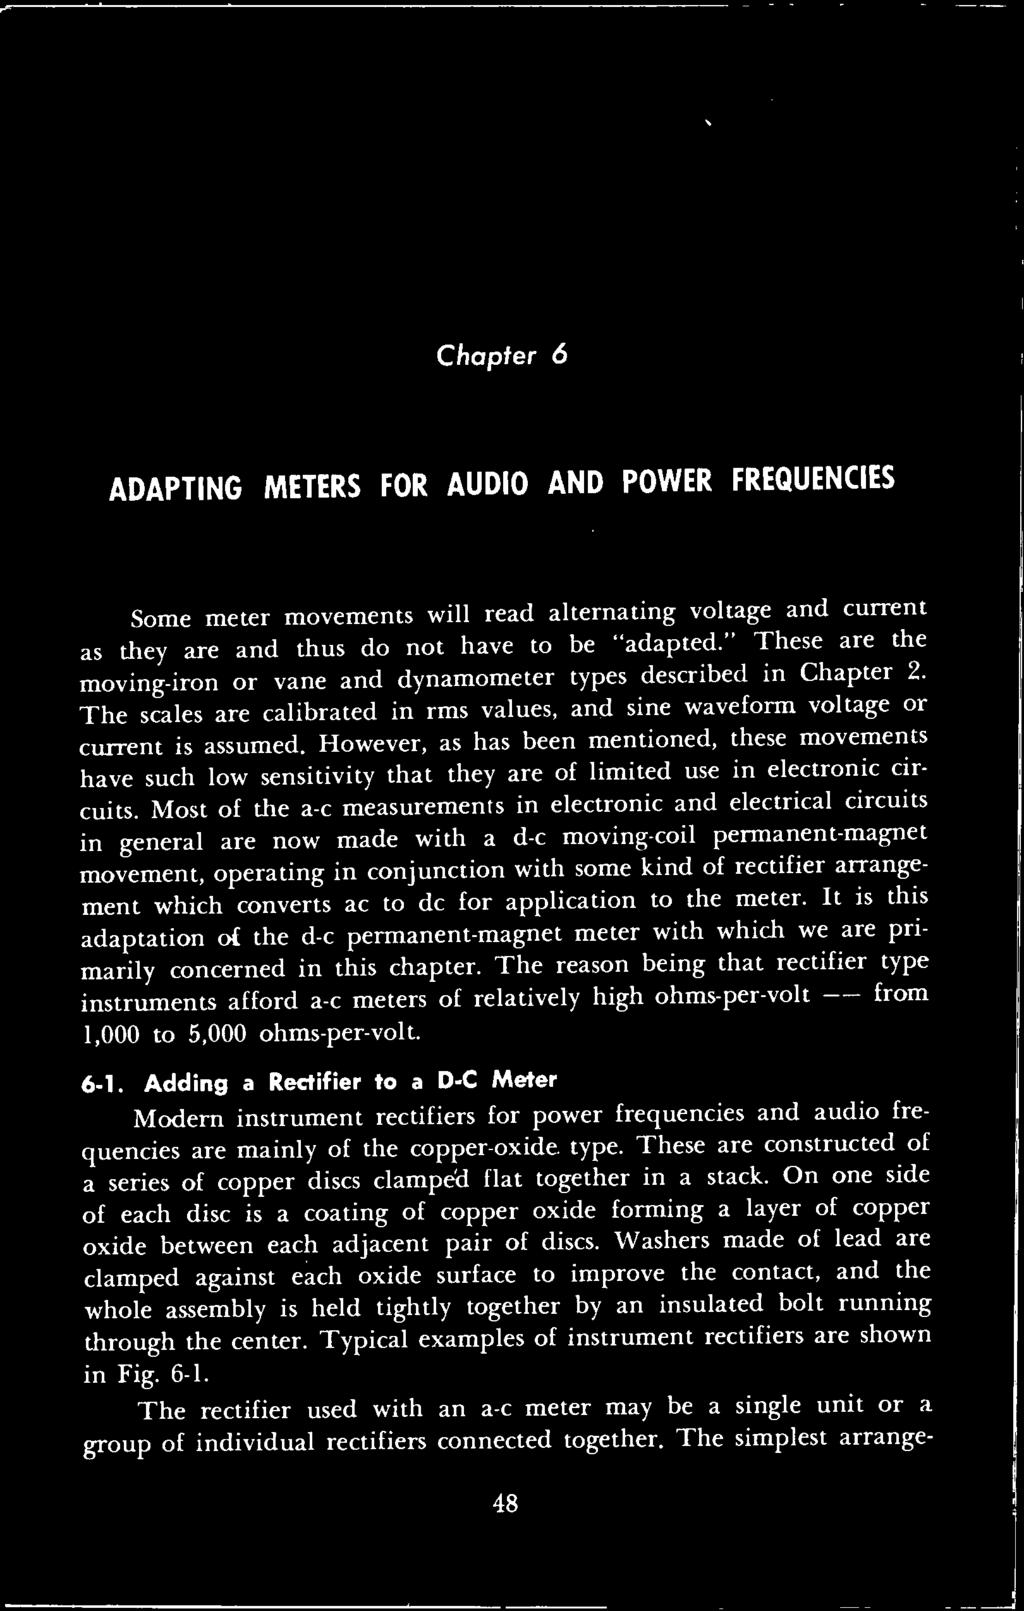 Chapter 6 ADAPTING METERS FOR AUDIO AND POWER FREQUENCIES Some meter movements will read alternating voltage and current as they are and thus do not have to be "adapted.